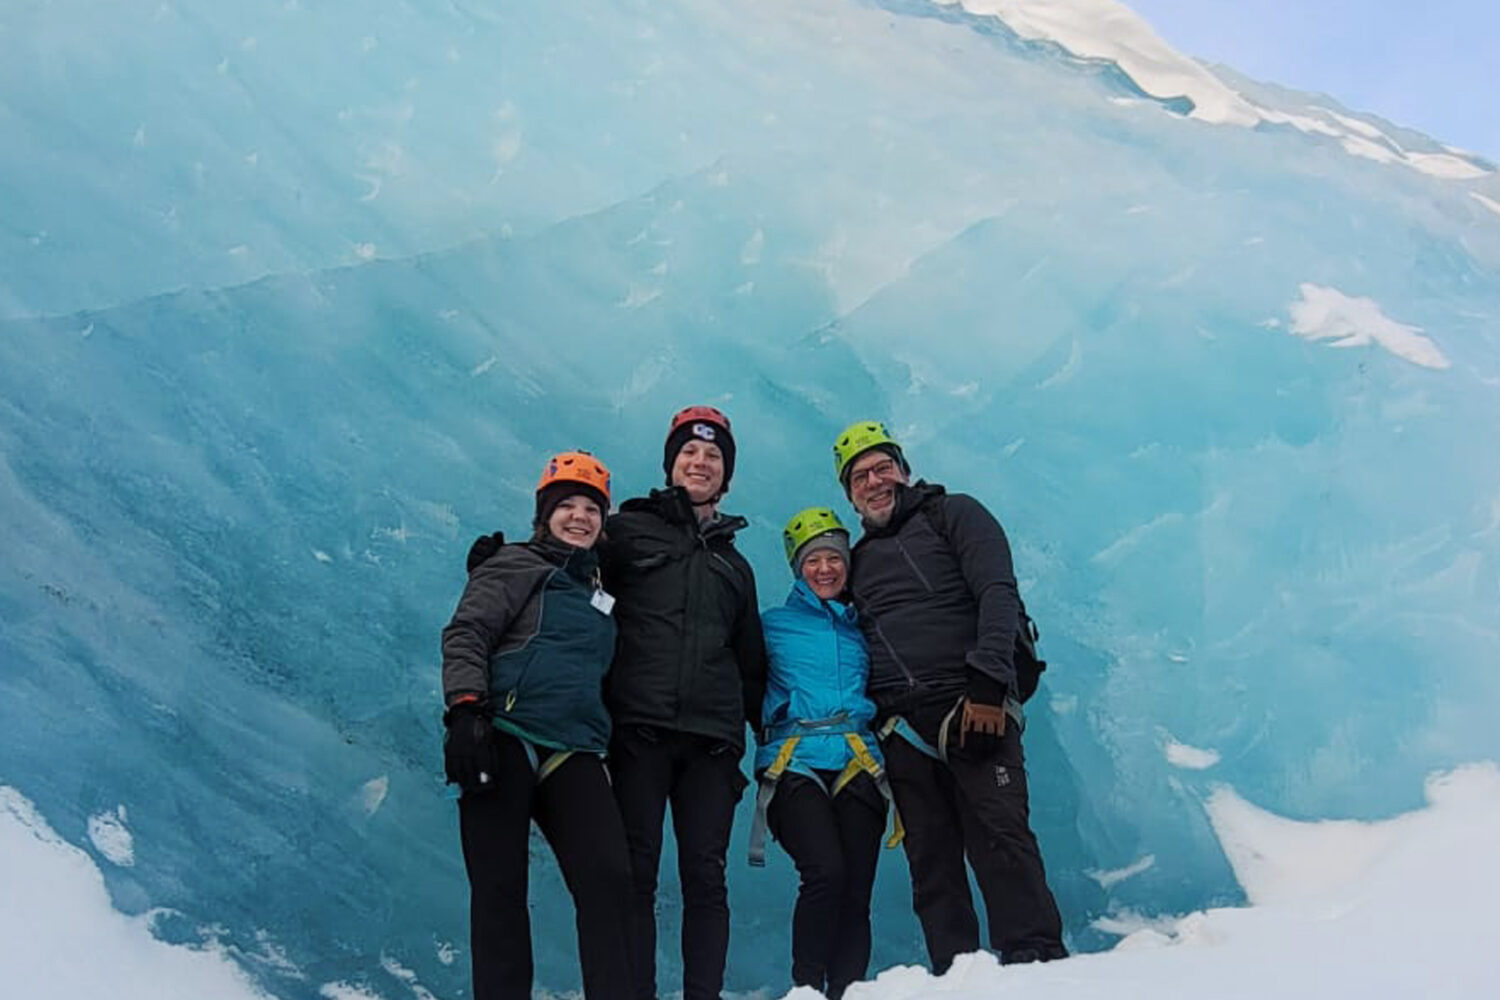 Family photo in front of a wall of blue ice